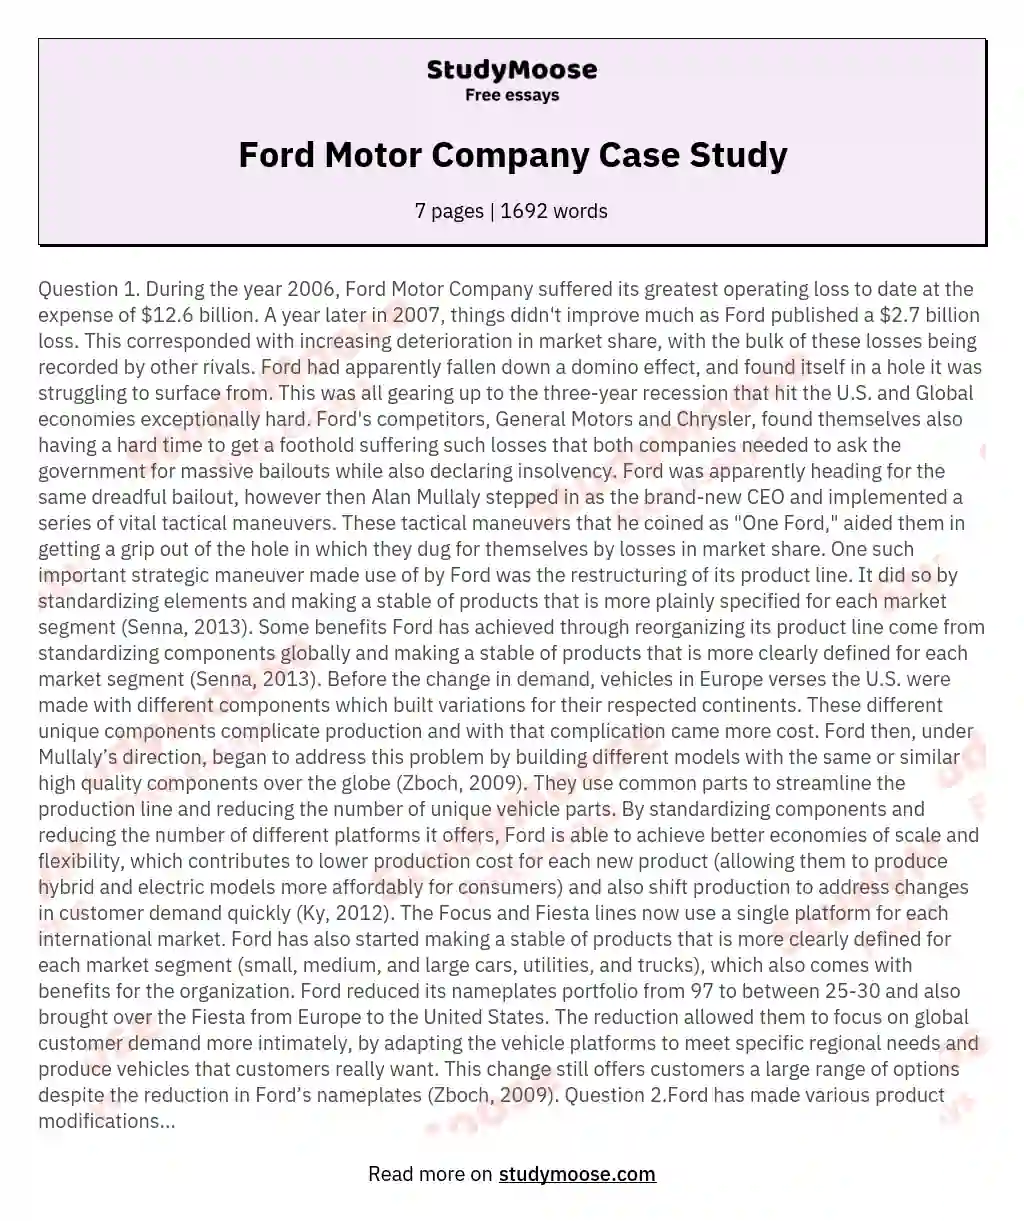 Ford Motor Company Case Study